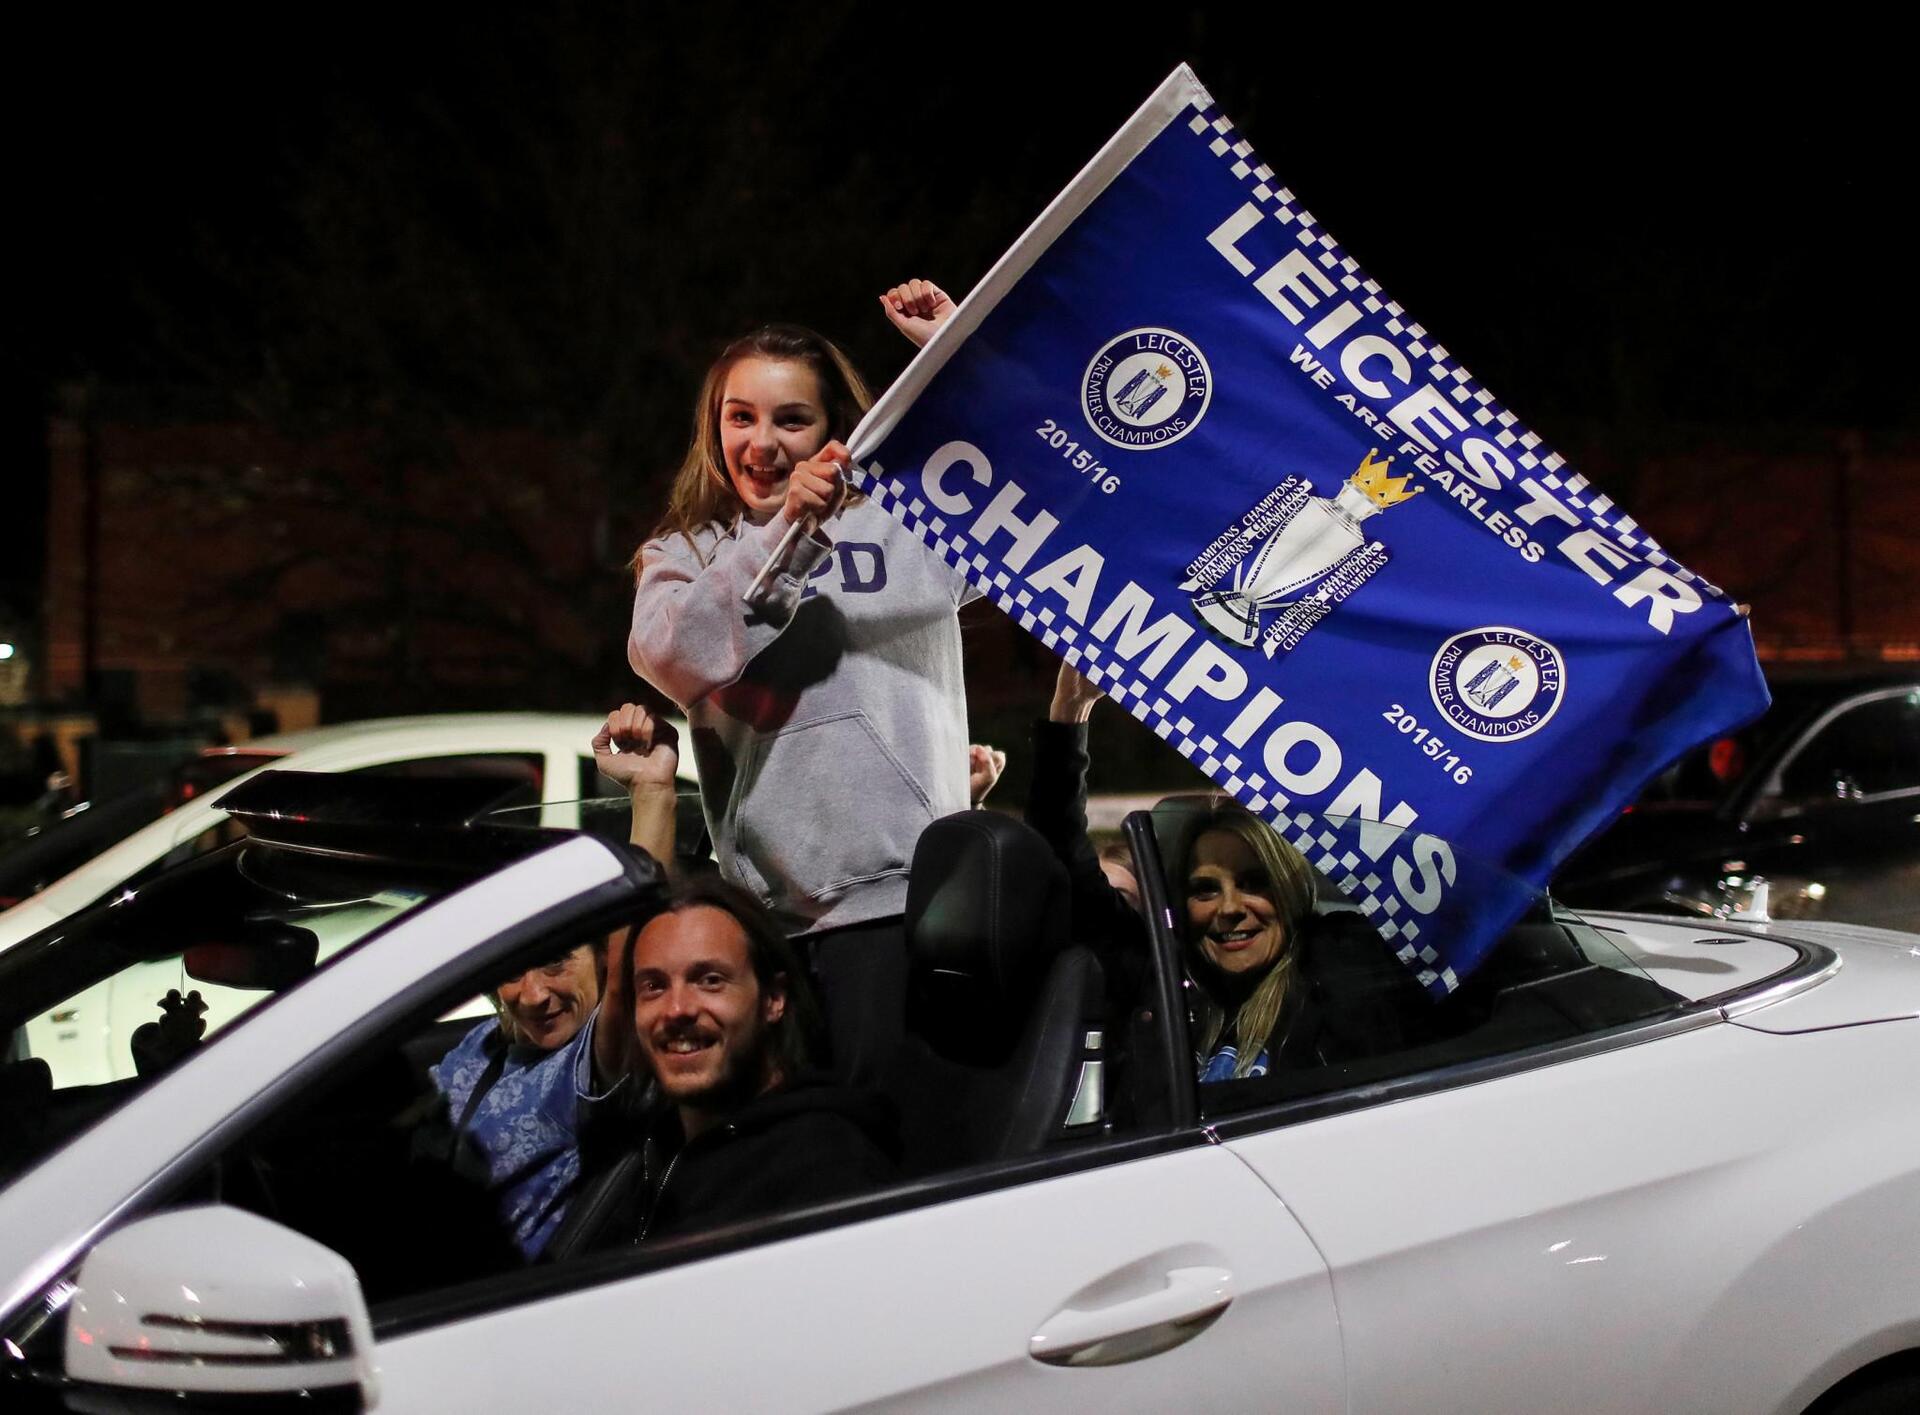 Leicester City fans celebrate outside the King Power stadium after their team won the Premier League title in Leicester, Britain May 3, 2016. REUTERS/Eddie Keogh